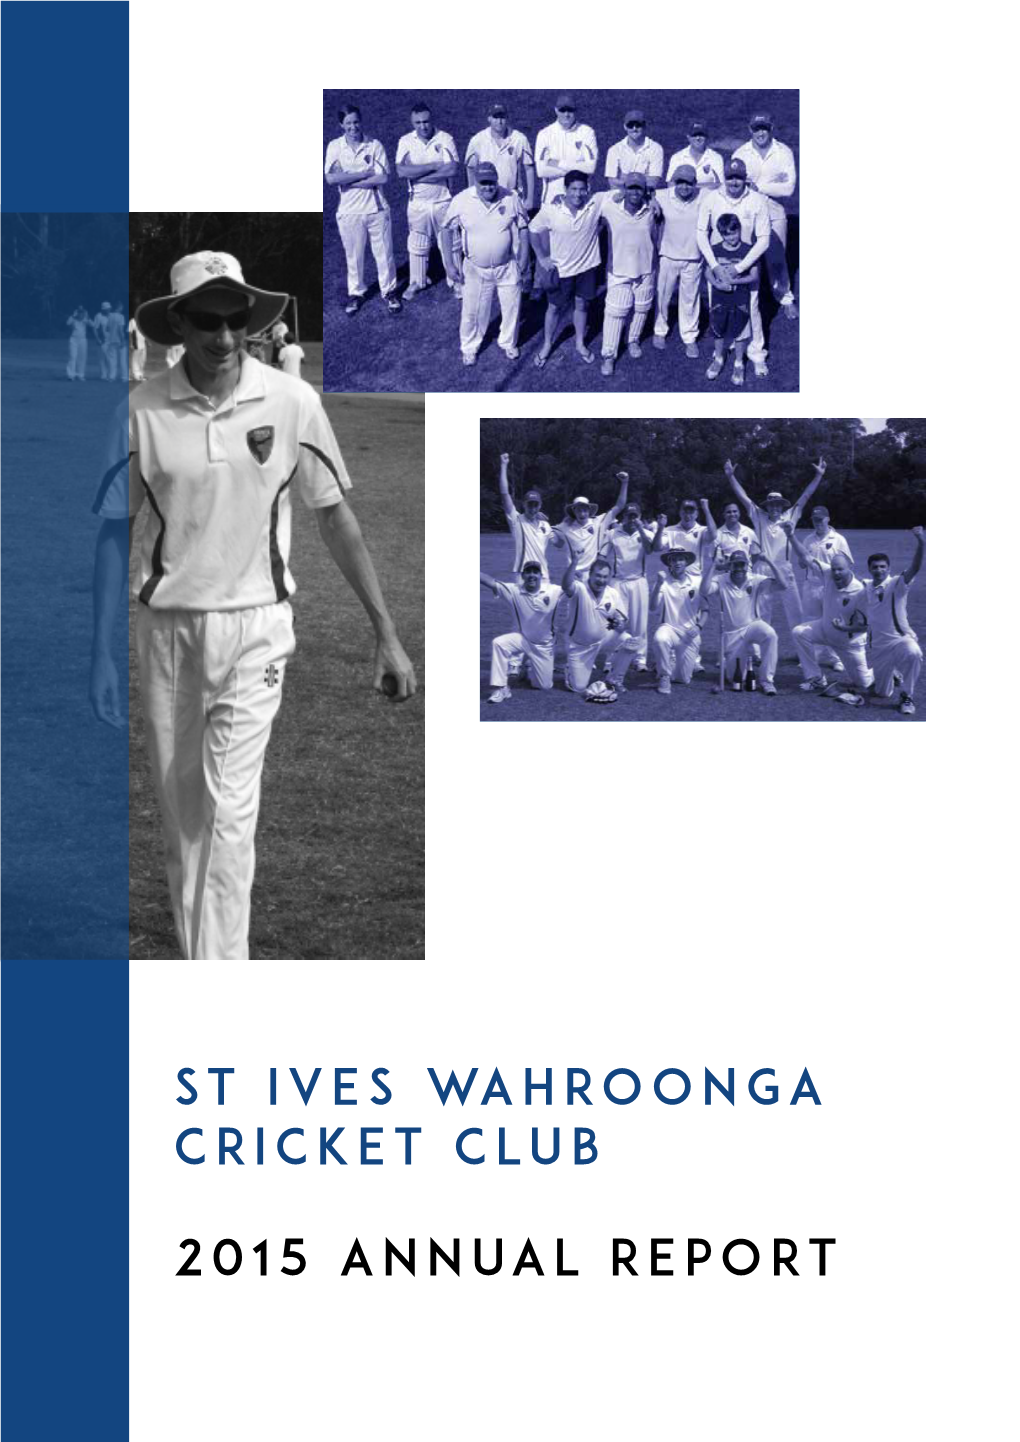 St Ives Wahroonga Cricket Club 2015 Annual Report